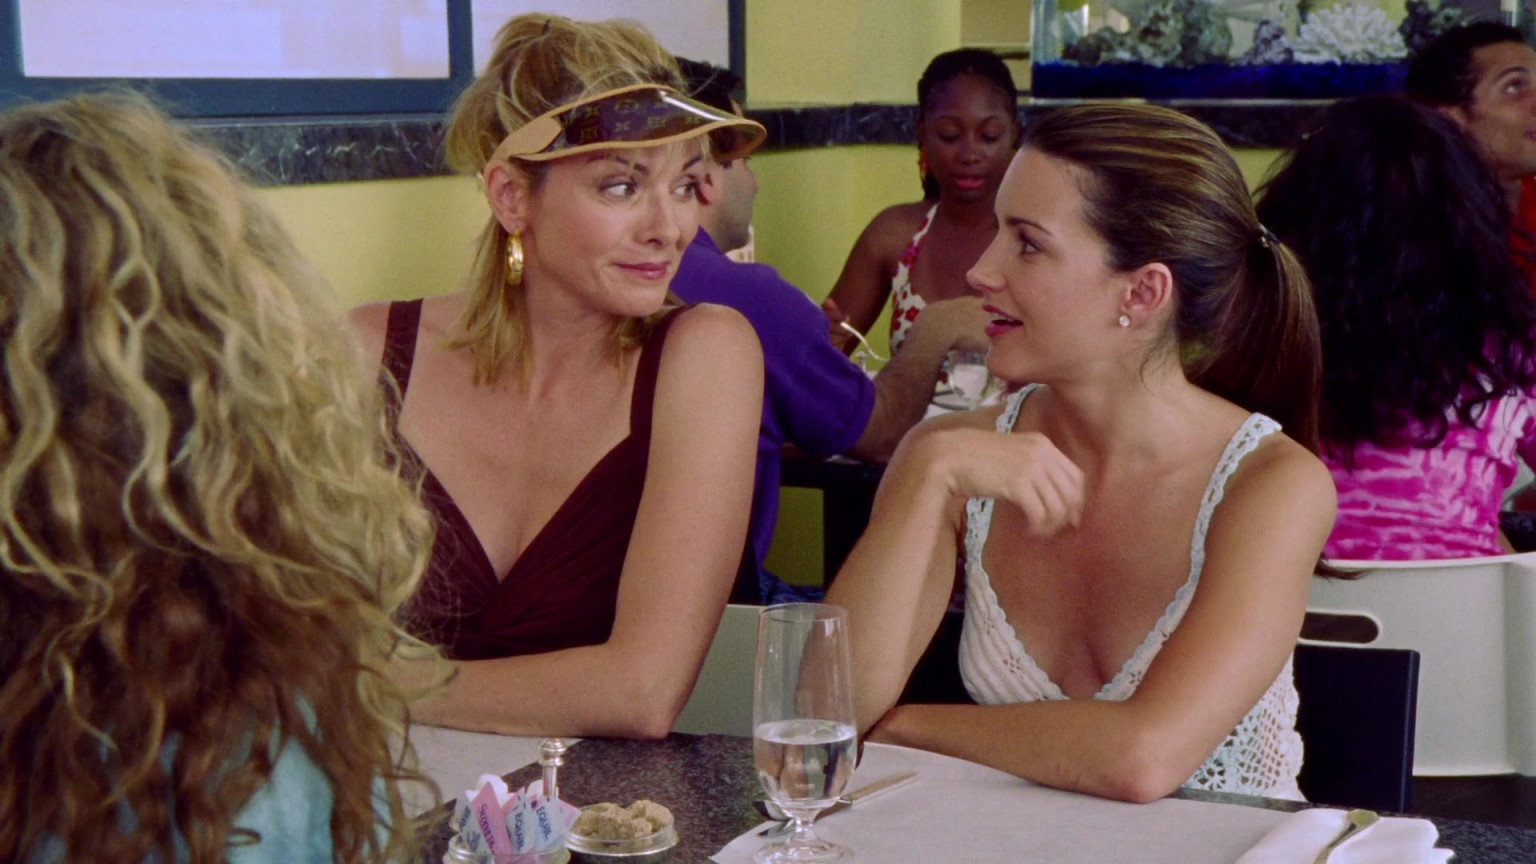 Louis Vuitton Monogram Visor Worn By Kim Cattrall As Samantha Jones In Sex And The City S03e14